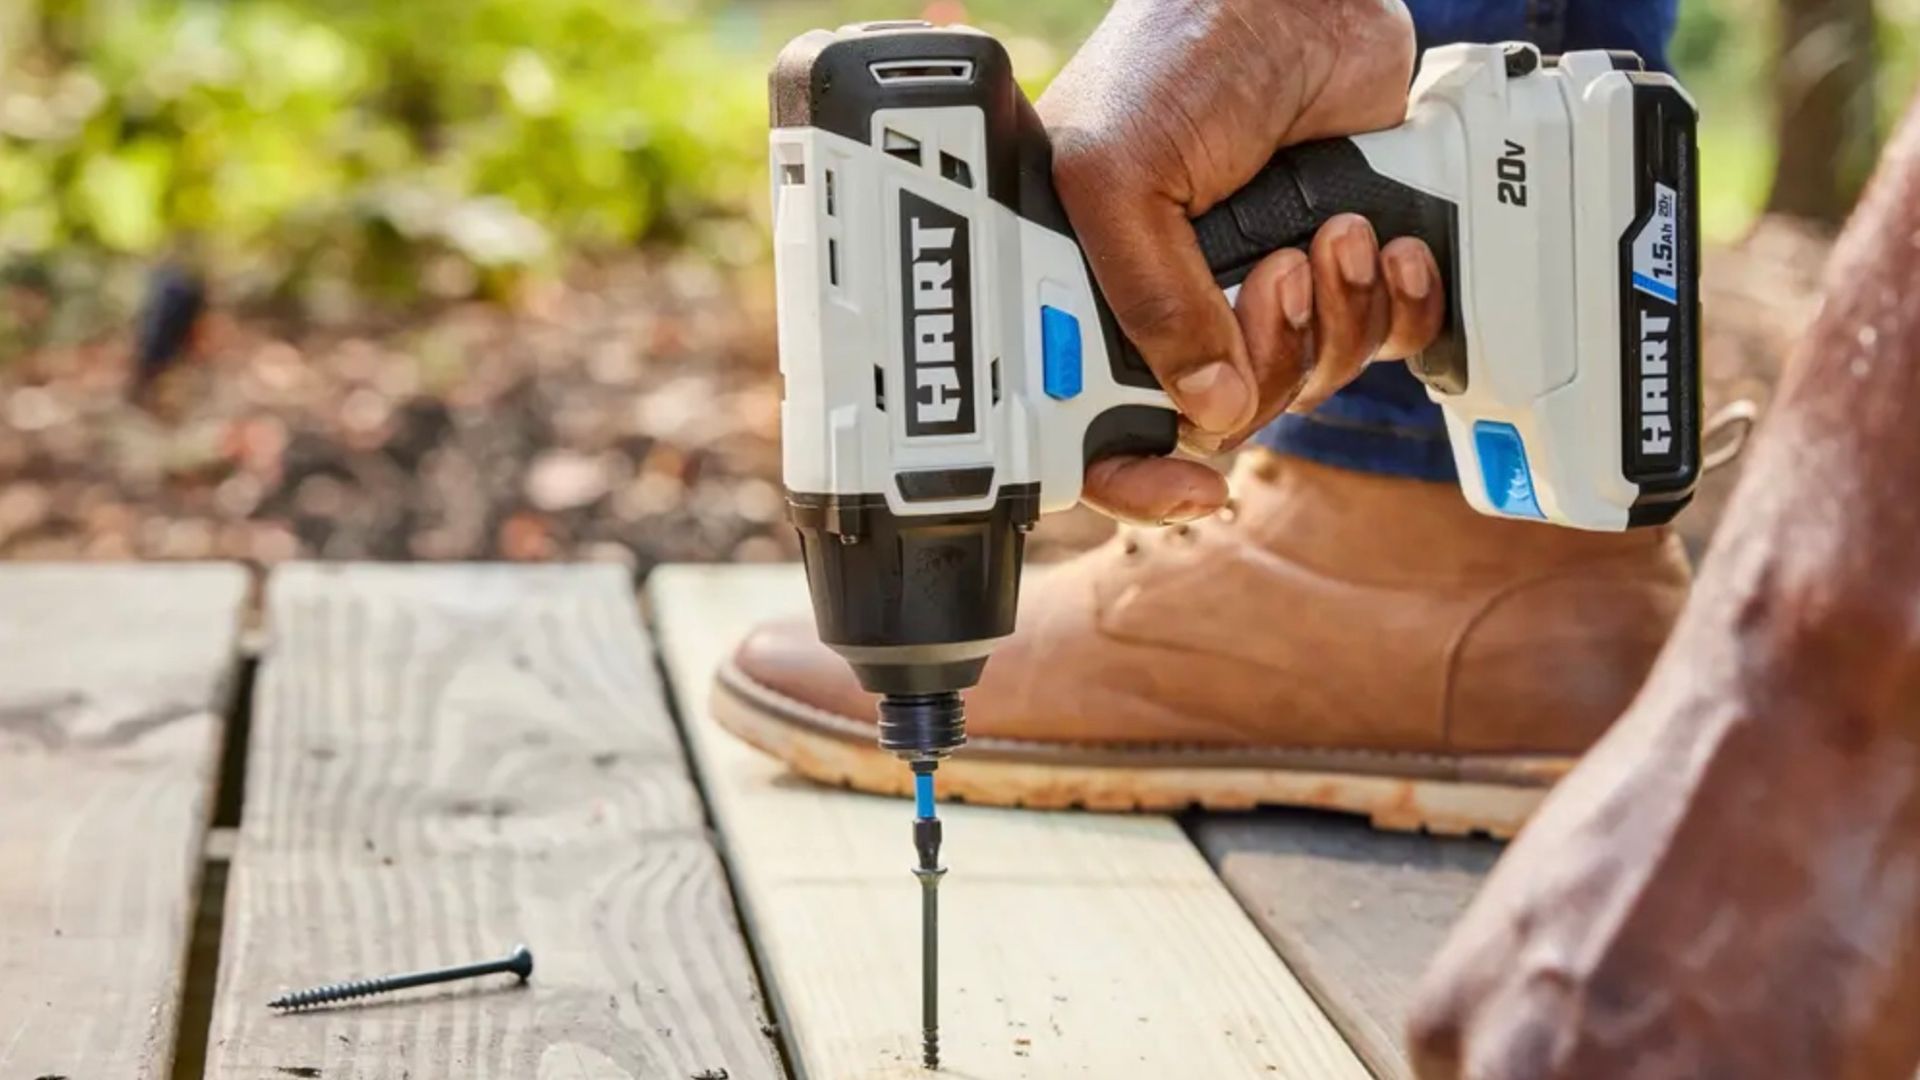 HART drill driver on a wooden deck.